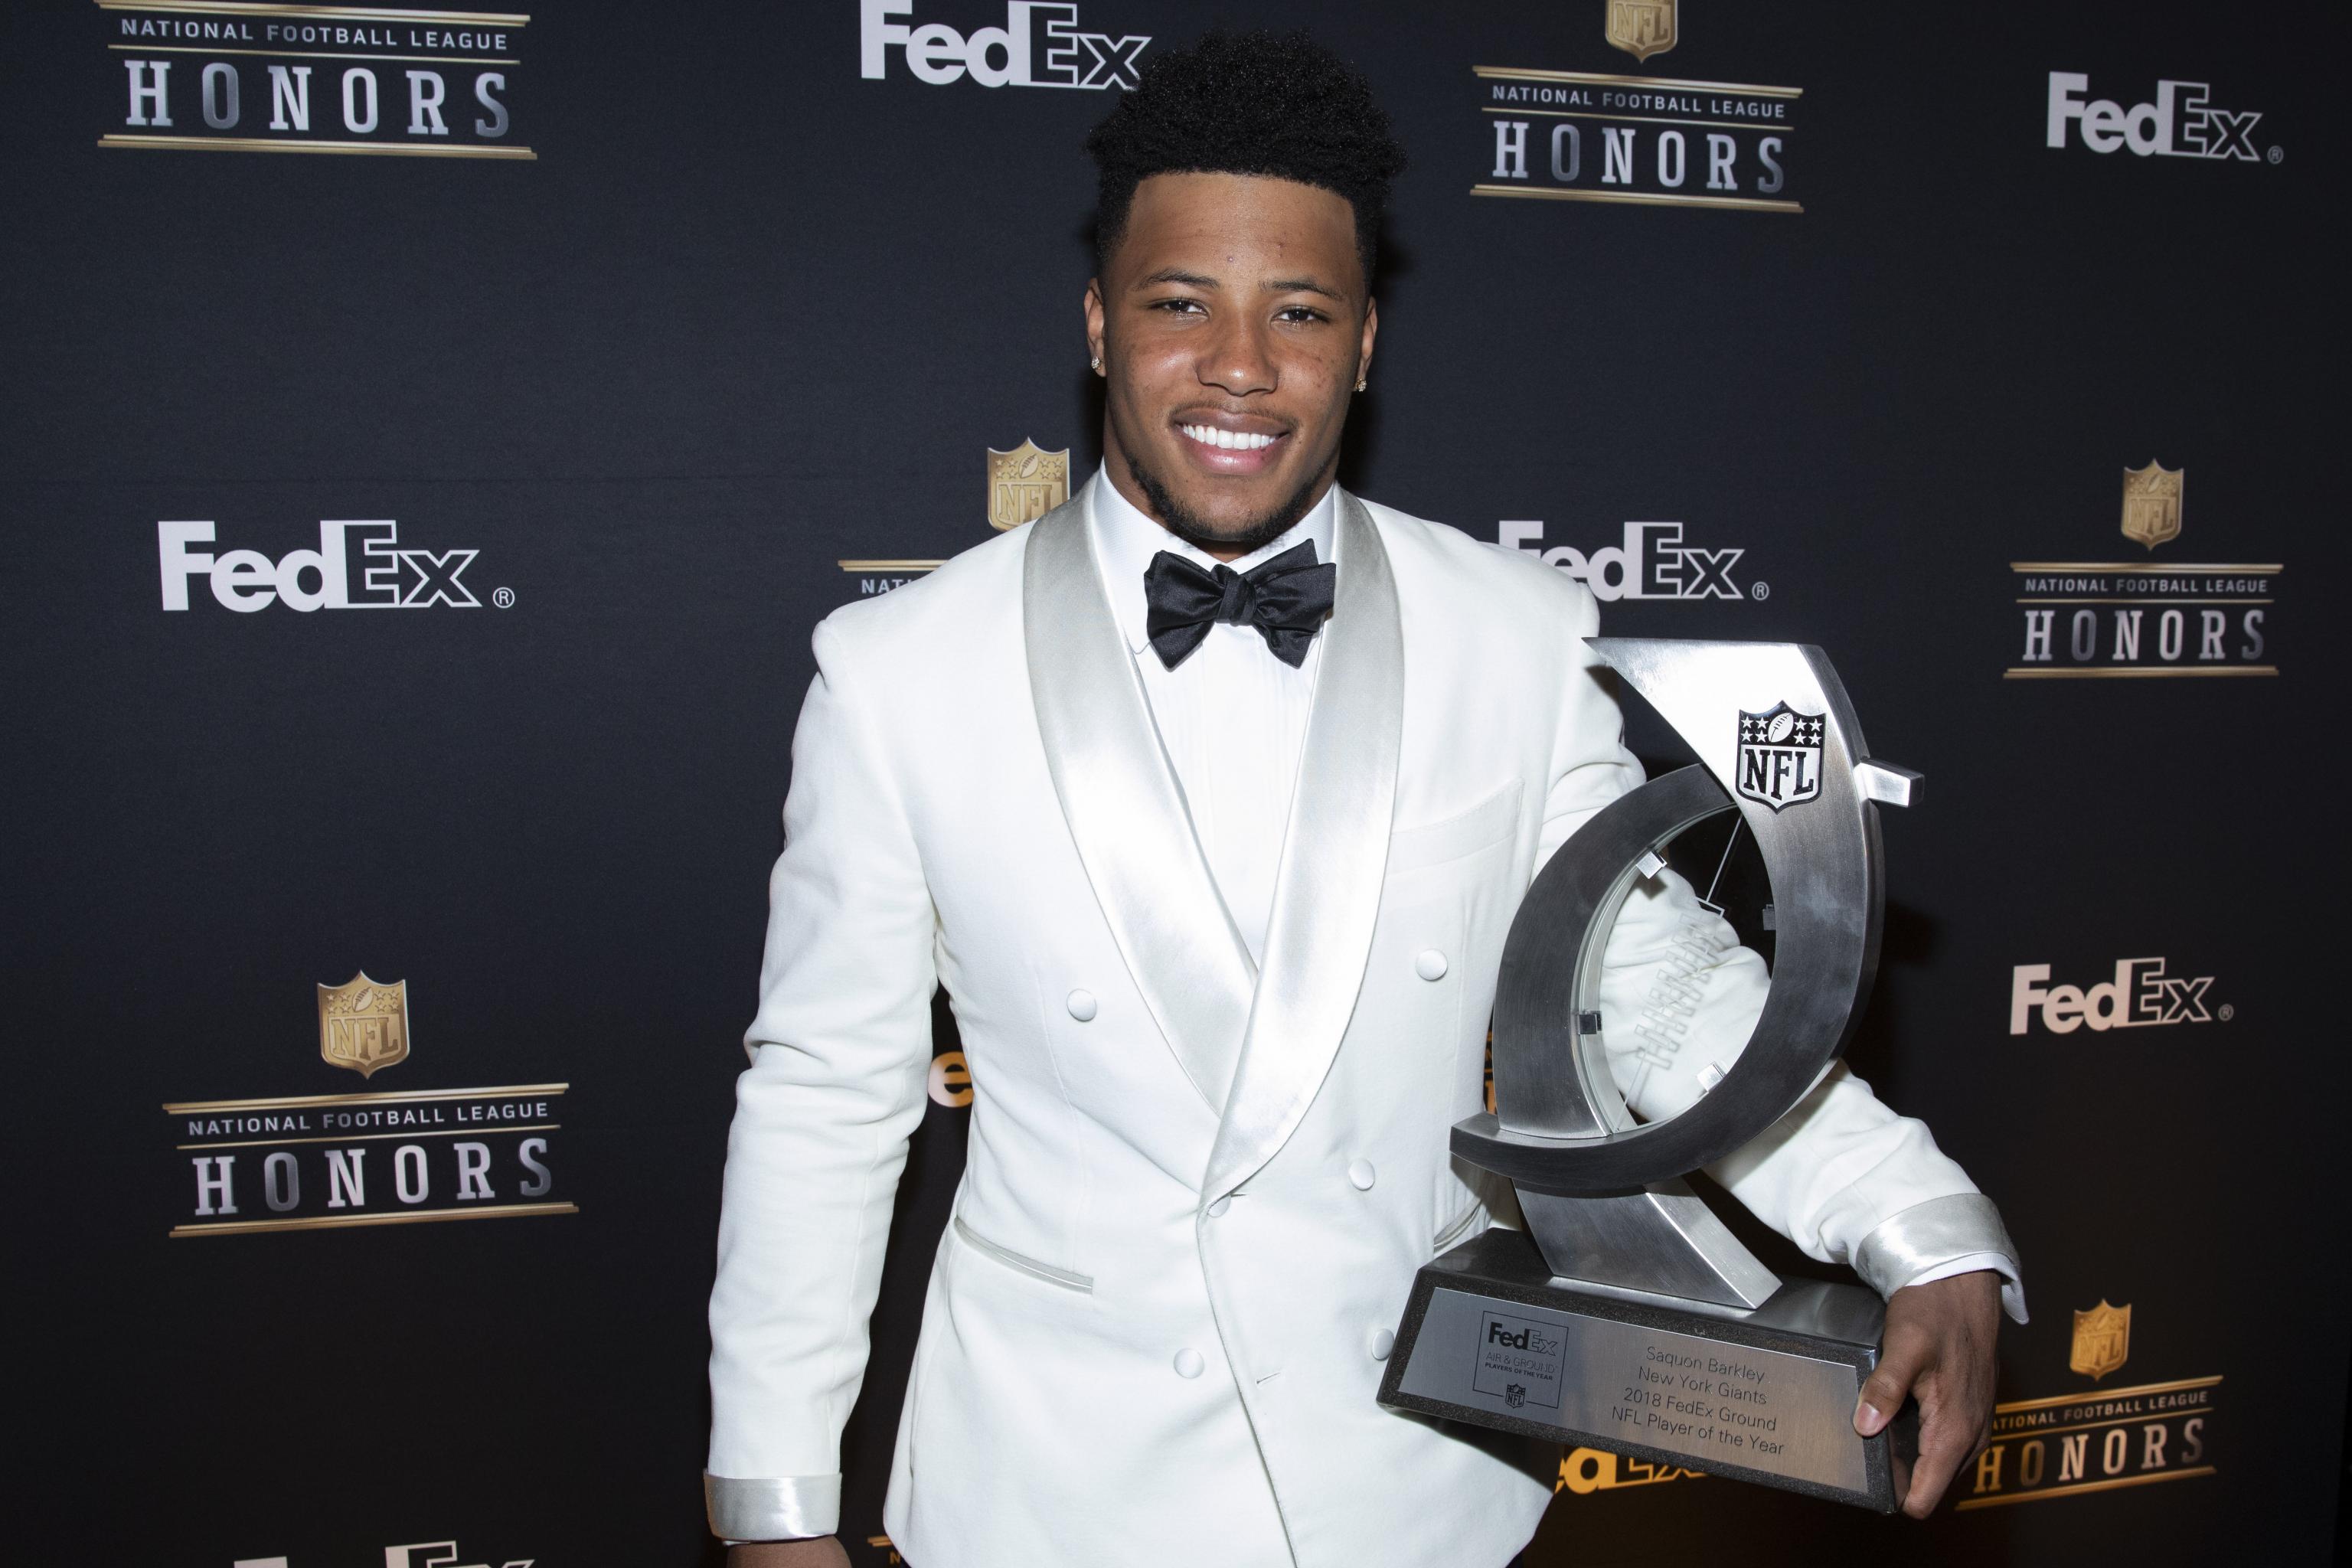 Giants' Saquon Barkley receives 'Quads' chain from Browns' Baker Mayfield  for winning award